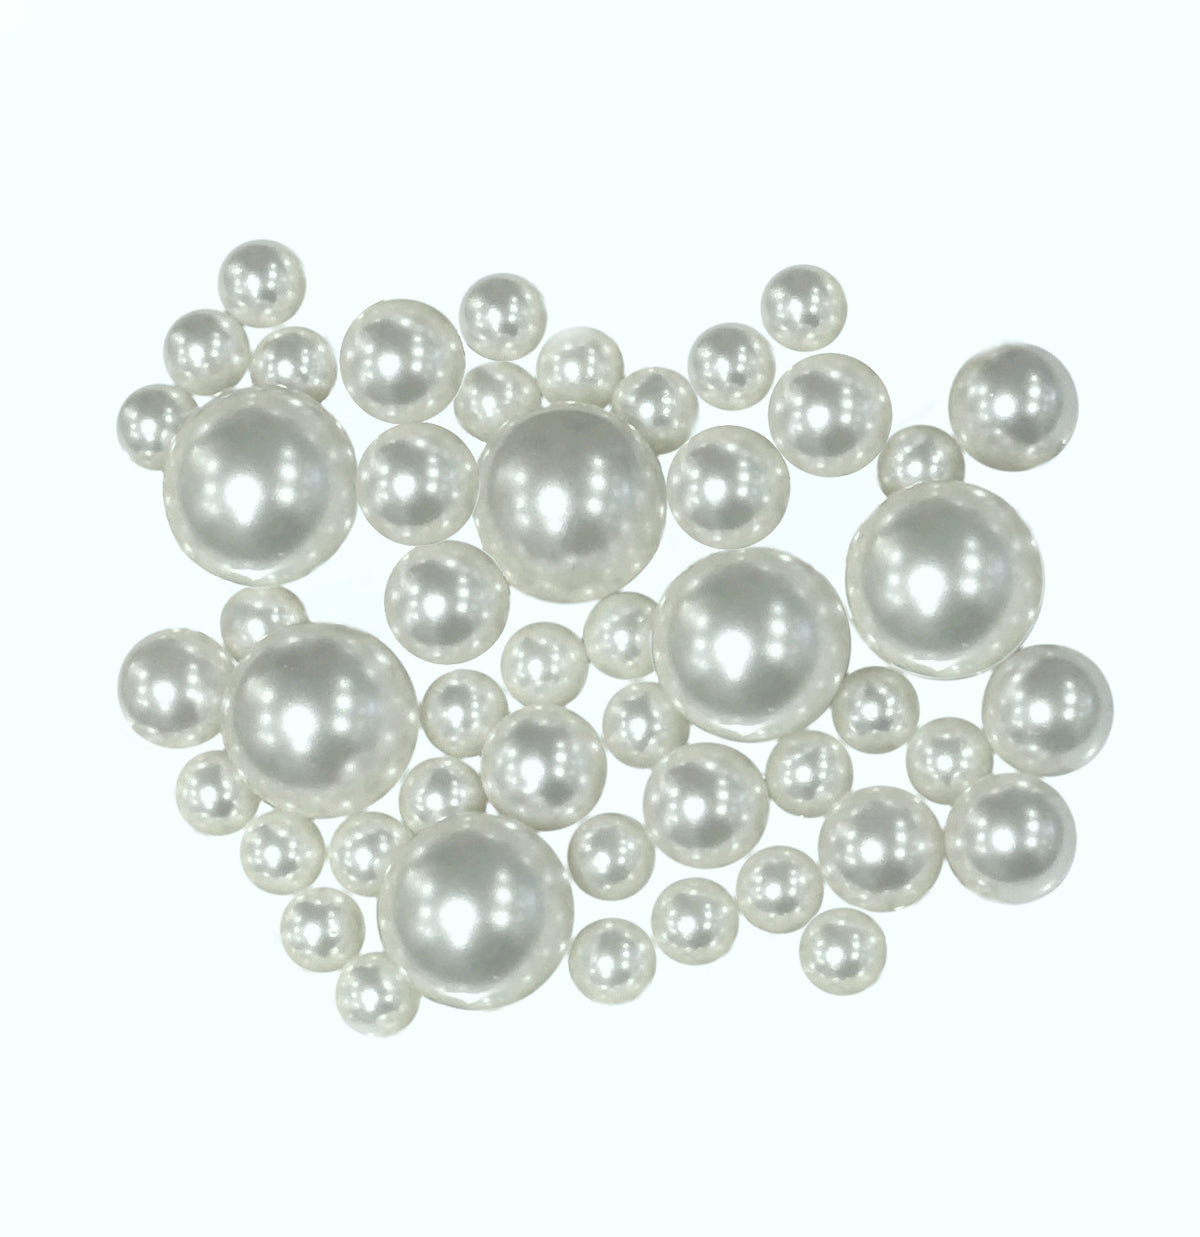 50 Floating White Pearls-Shiny-Fills 1 Gallon of Floating Pearls & Transparent Gels For Floating Effect-With Exclusive Measured Gels Prep Bag-Option: 3 Submersible Fairy Lights Strings